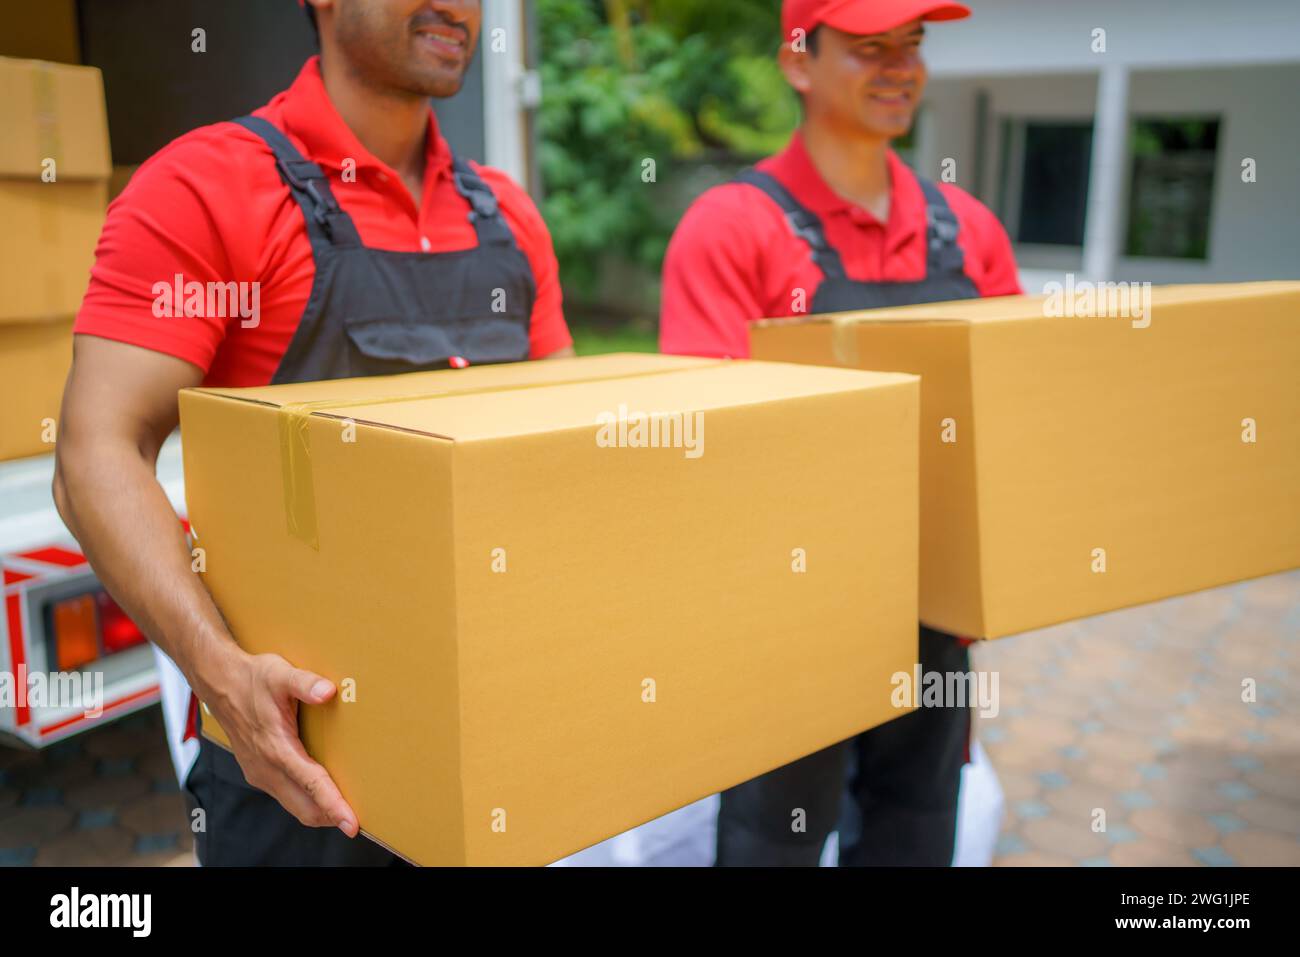 Two male delivery professionals as they hold parcels, ready to deliver them to customers at their doorstep Stock Photo